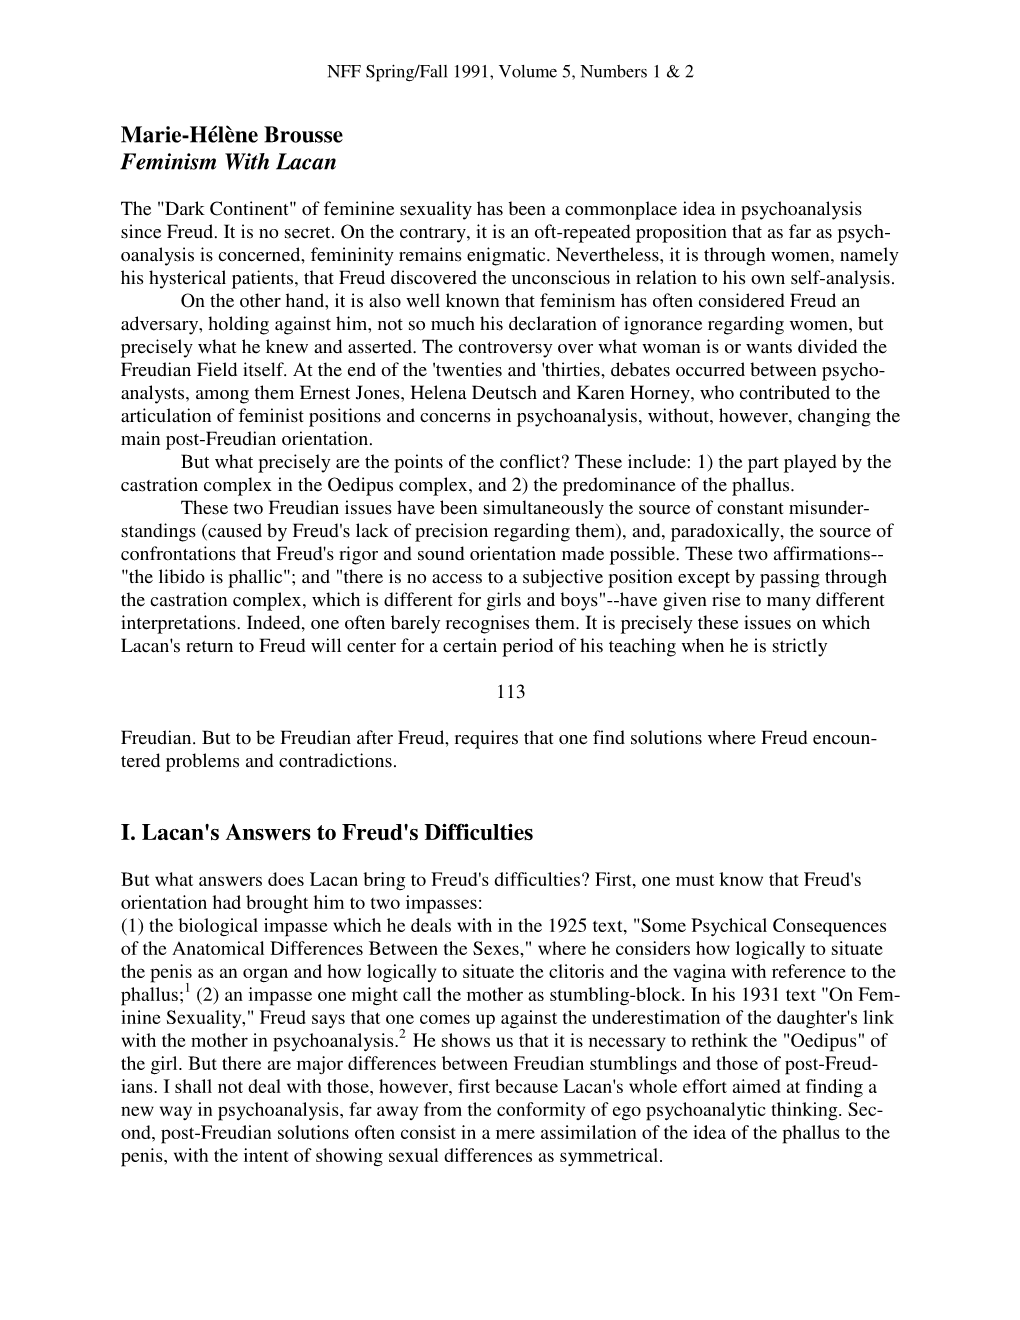 Marie-Hélène Brousse Feminism with Lacan I. Lacan's Answers to Freud's